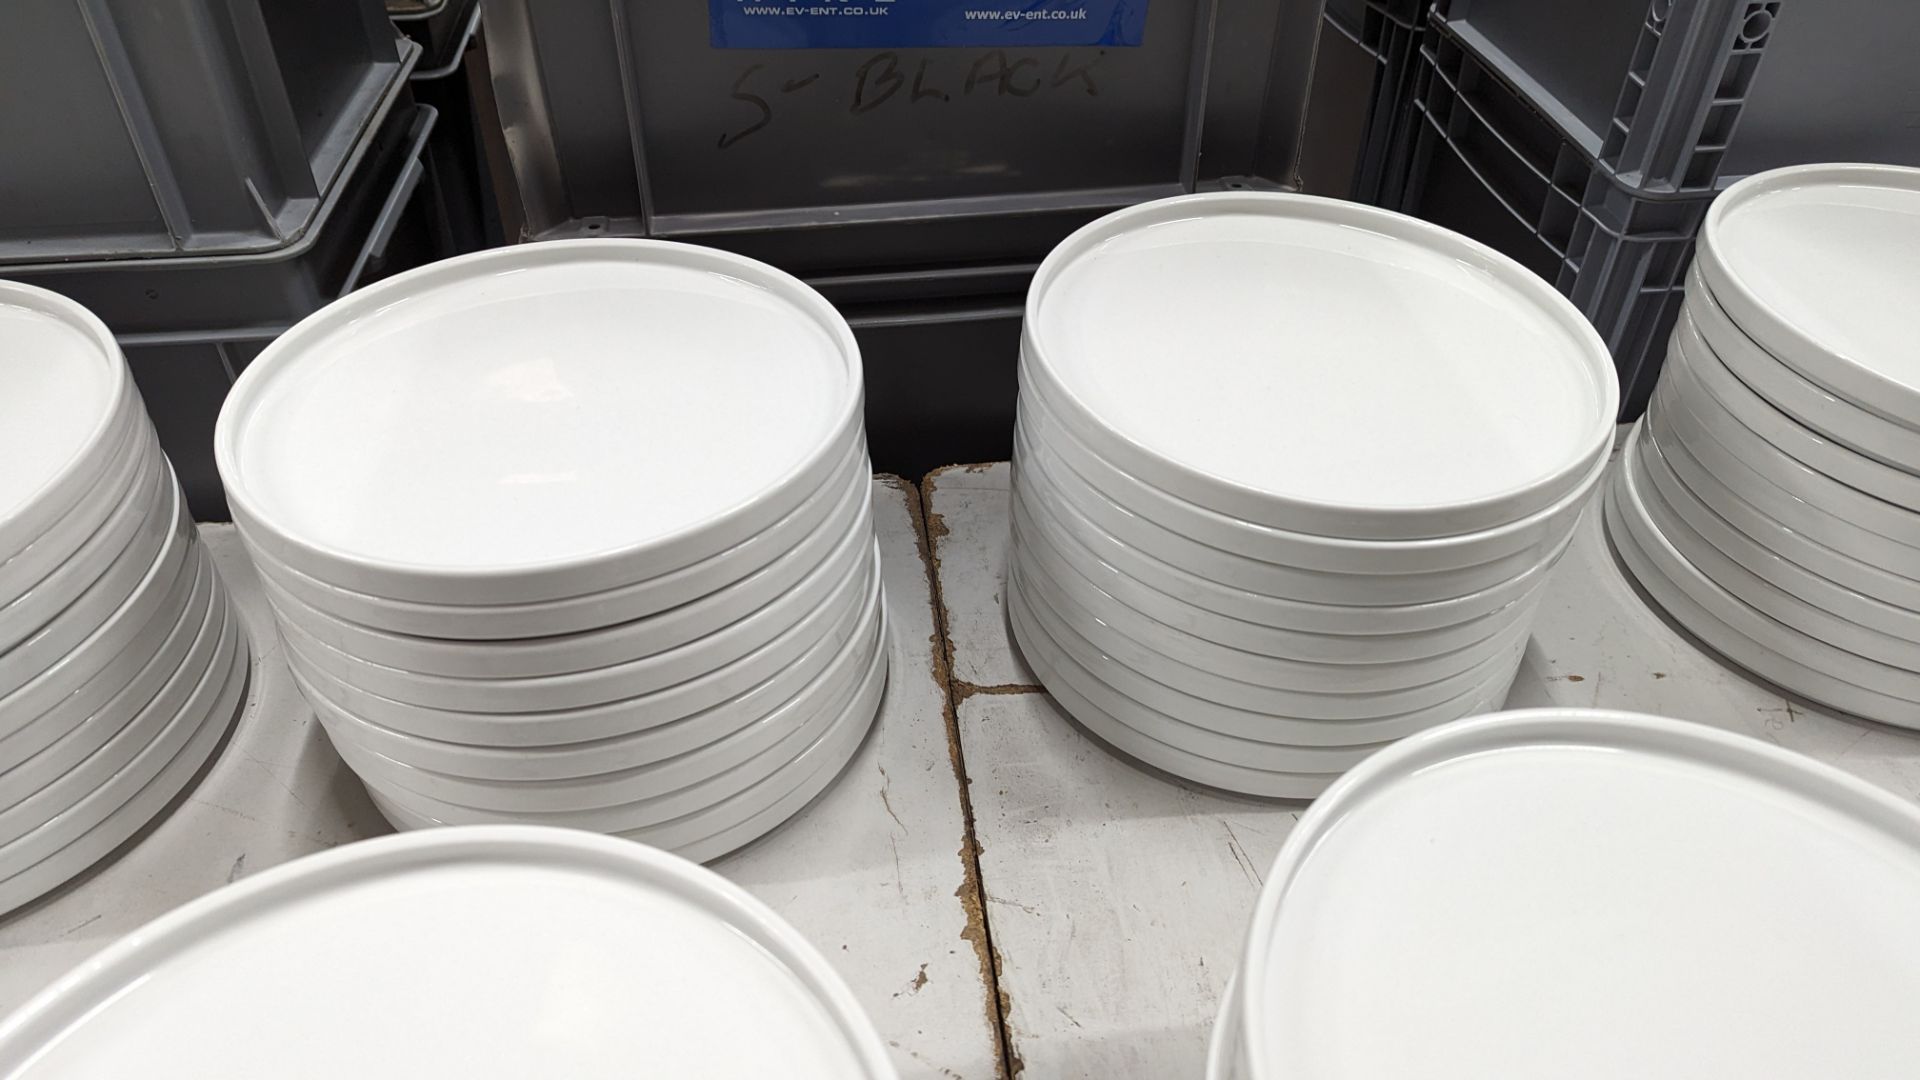 60 off Genware 245mm round flat plates with upright rim to the outer edge - Image 5 of 6